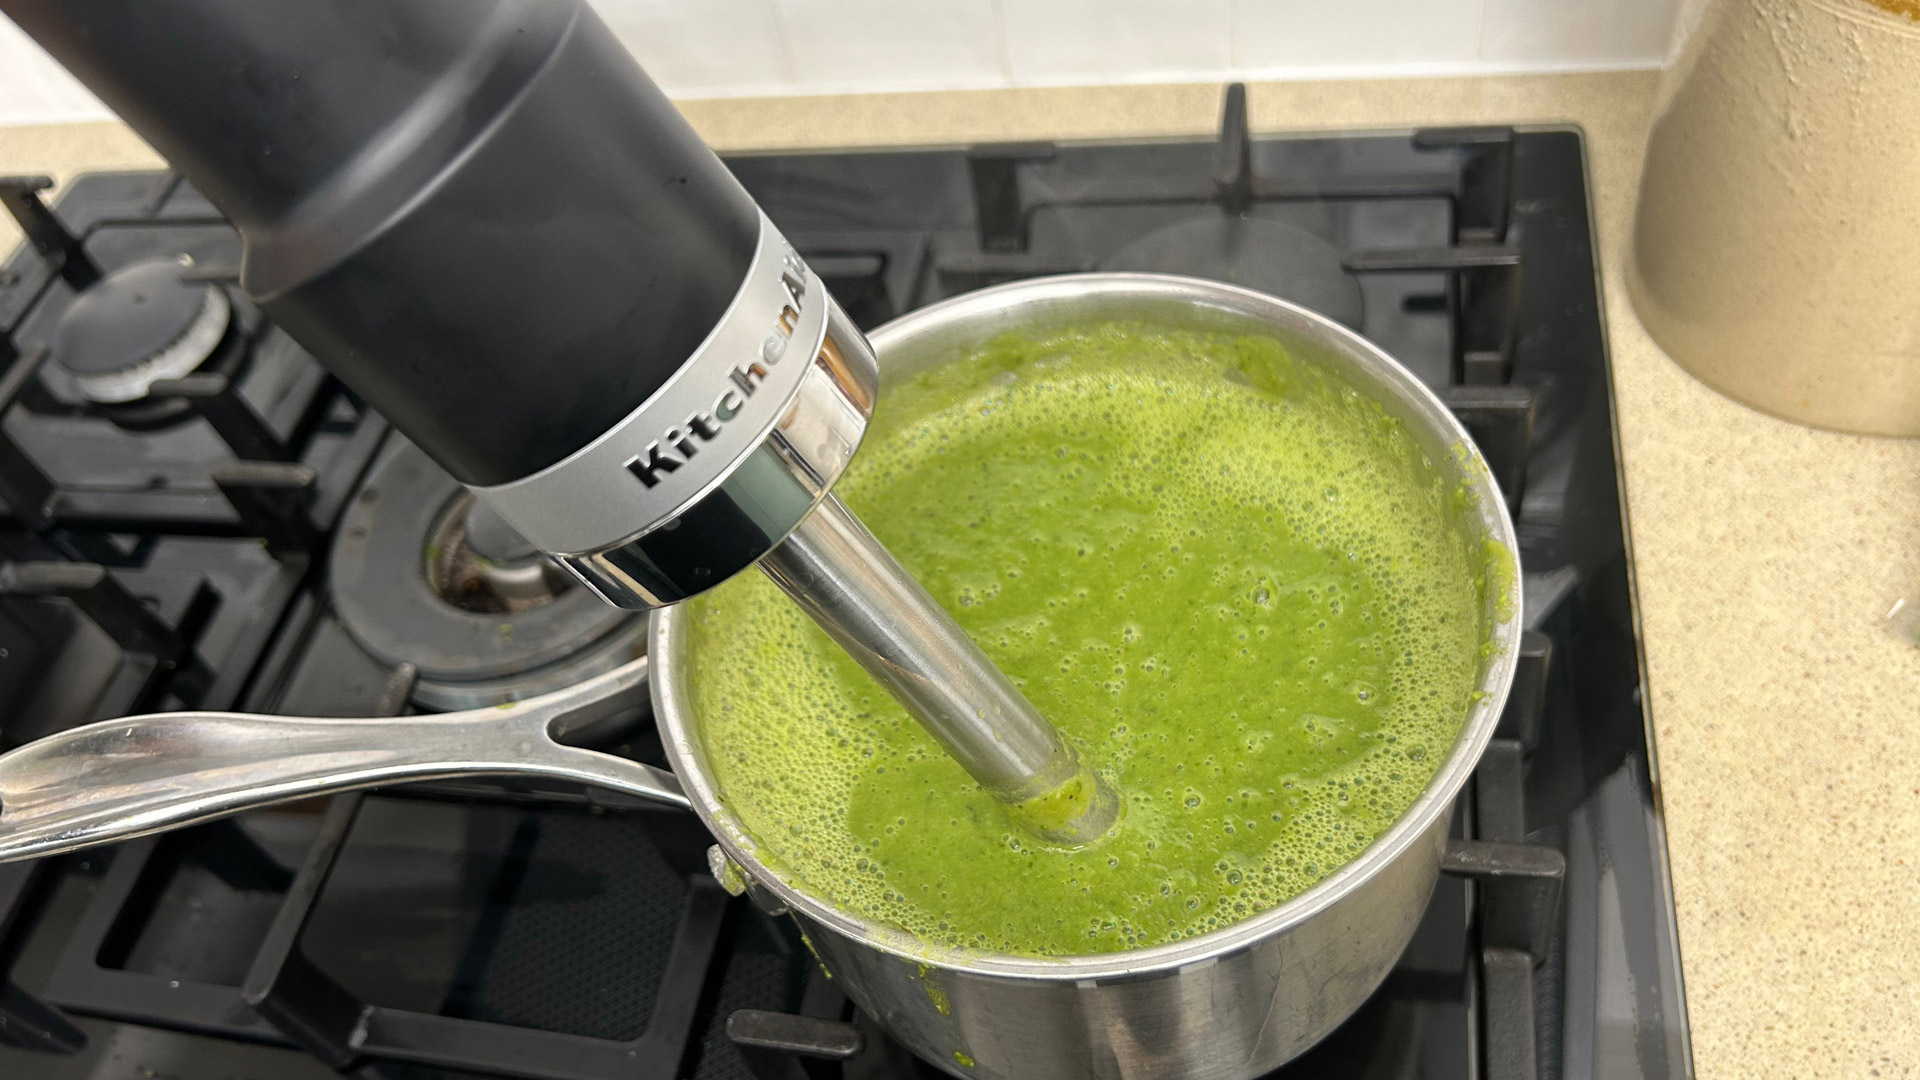 Making pea and mint soup with the KitchenAid Go Cordless Hand Blender: after